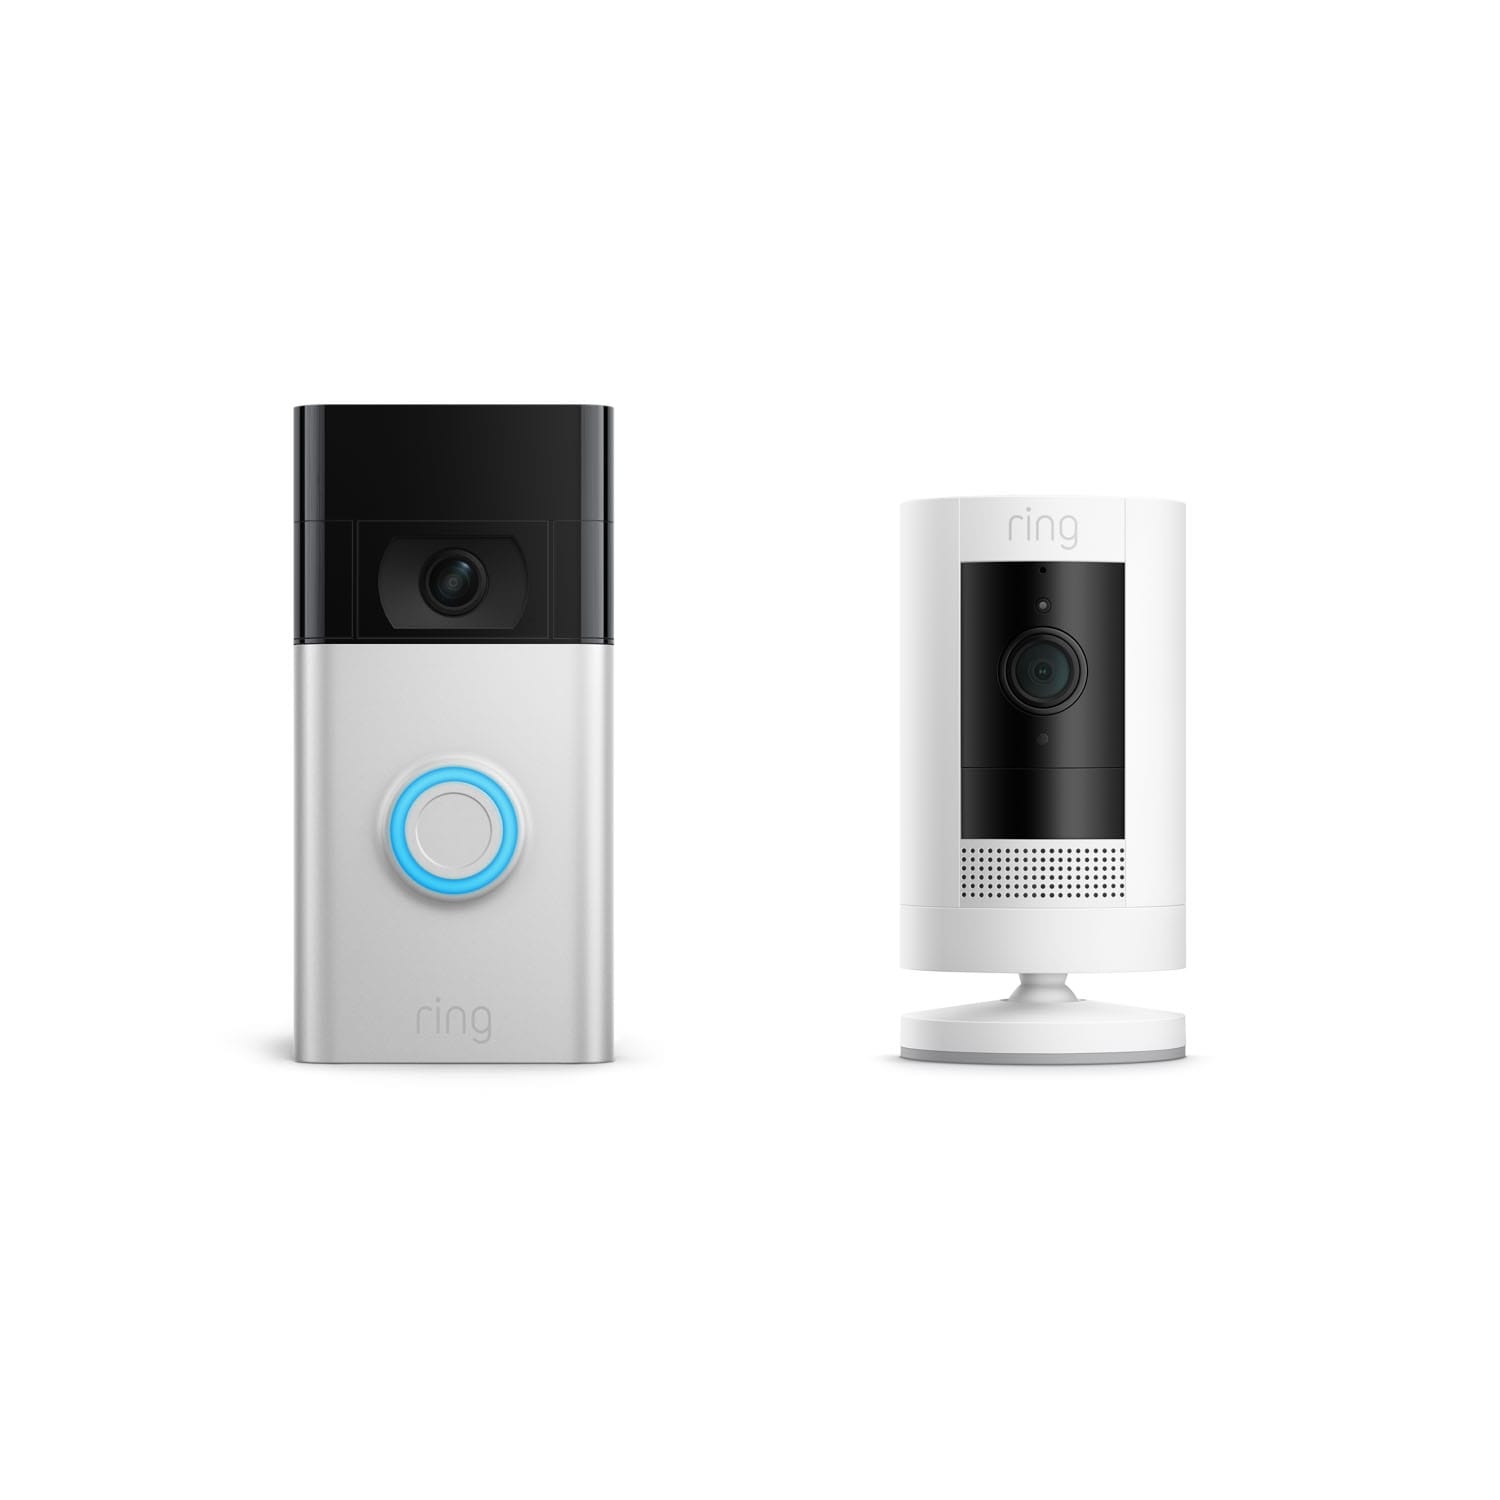 Connected Basic Kit (Video Doorbell (2nd Generation) + Stick Up Cam Battery) - Silver + White